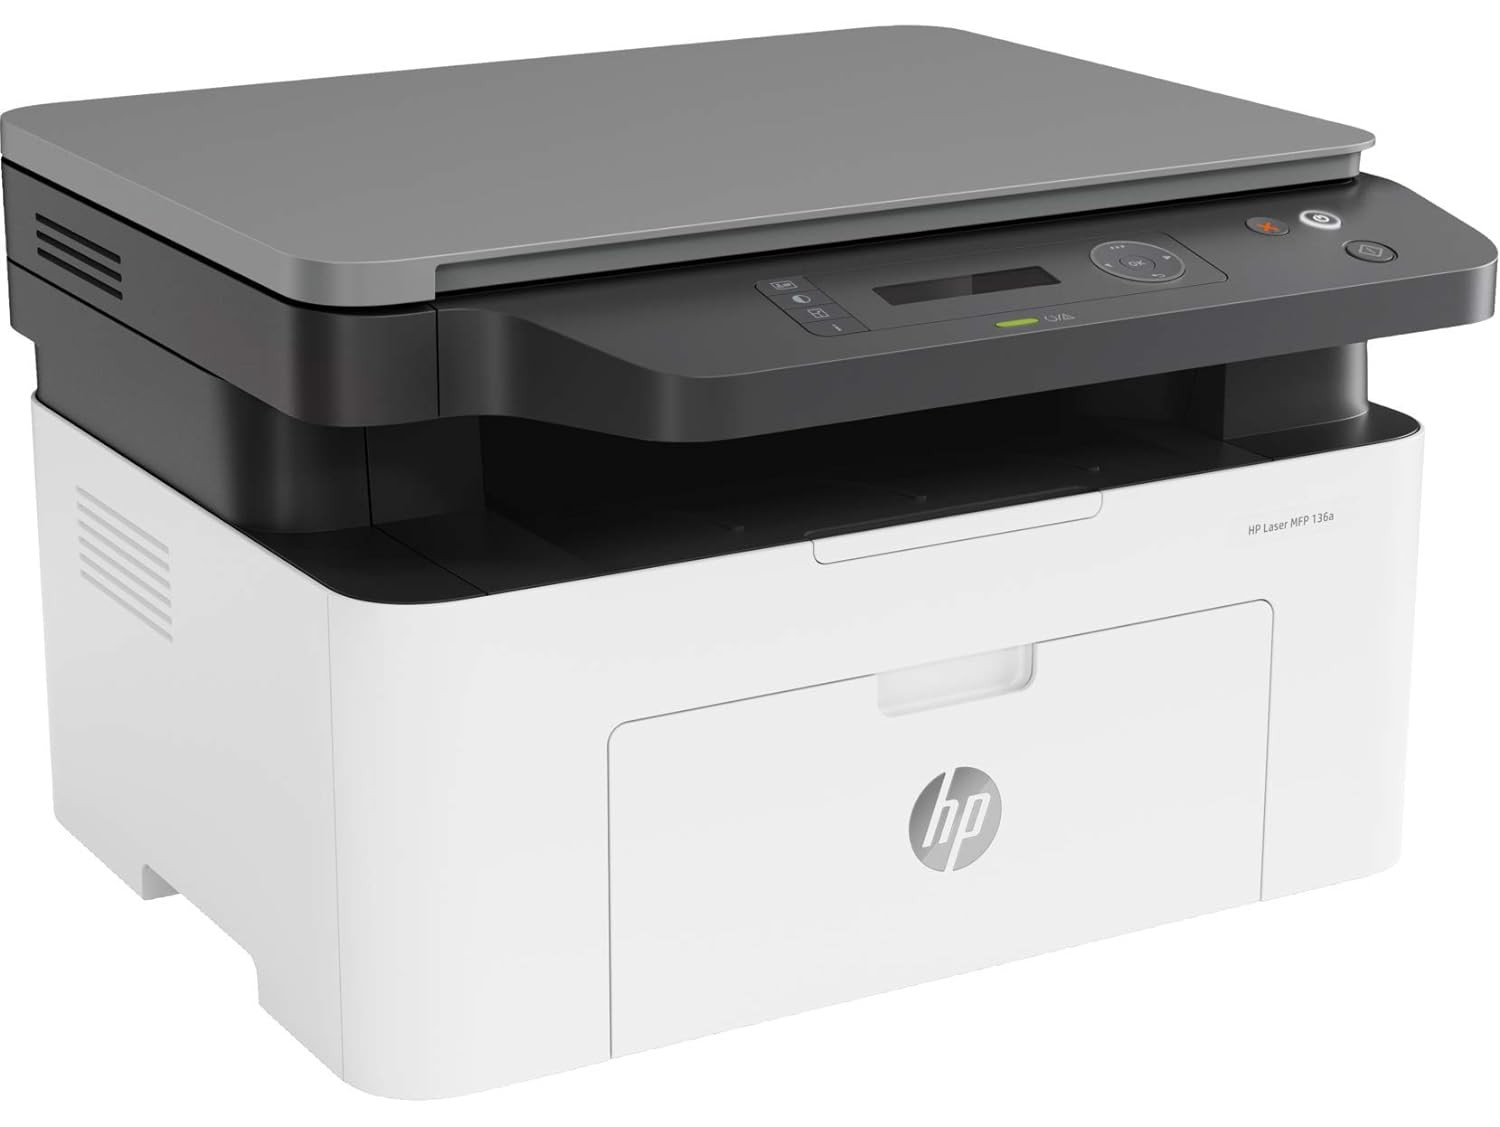 HP Laser MFP 136a, Wireless, Print, Copy, Scan, 40-Sheet ADF, Ethernet, Hi-Speed USB 2.0, Up to 21 ppm, 150-sheet Input Tray